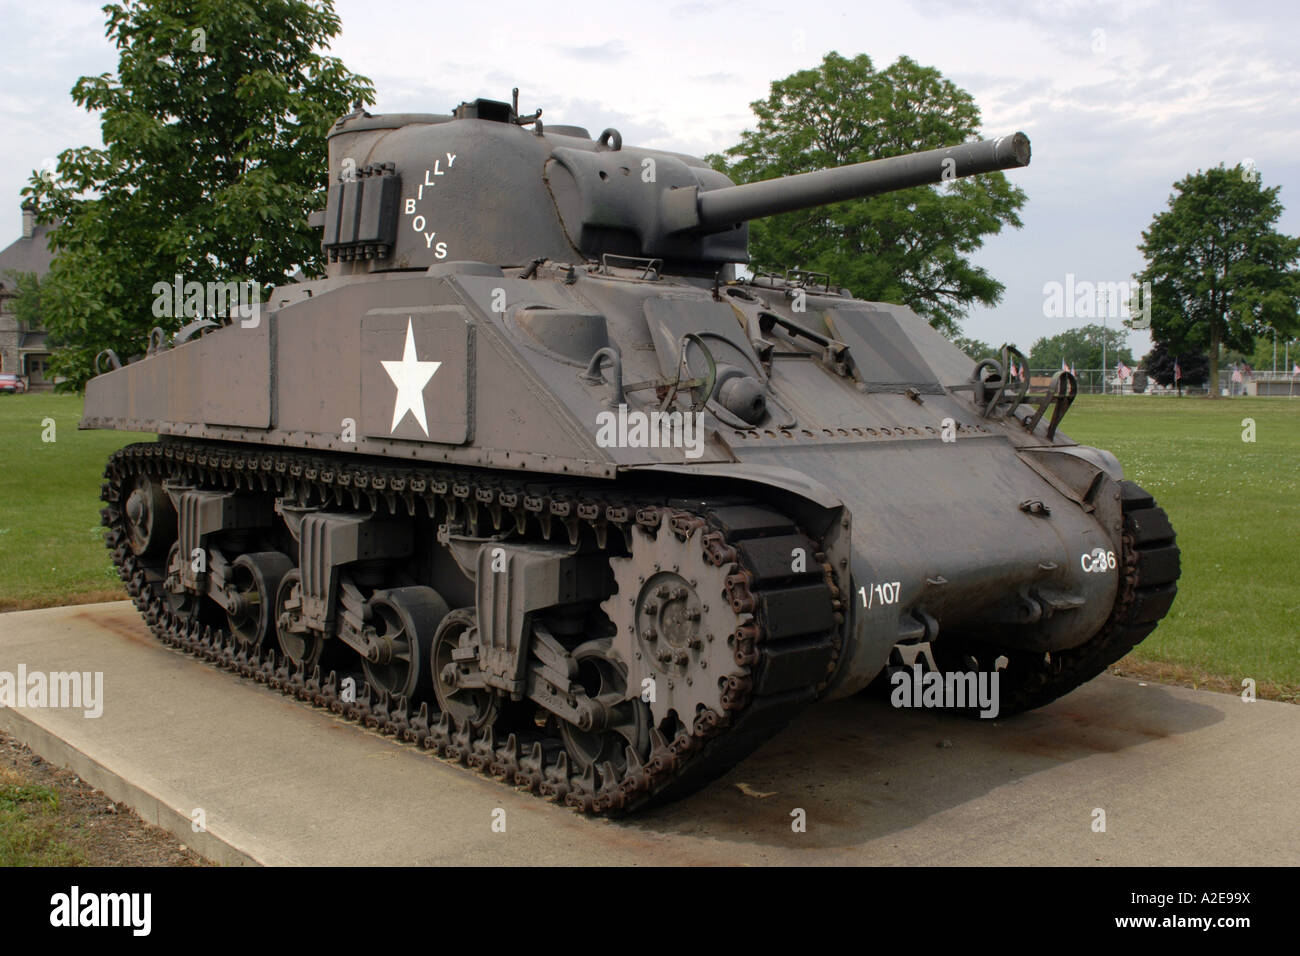 Sherman Tank from WW2 on display at the Veterans Hospital in Sandusky Ohio OH Stock Photo